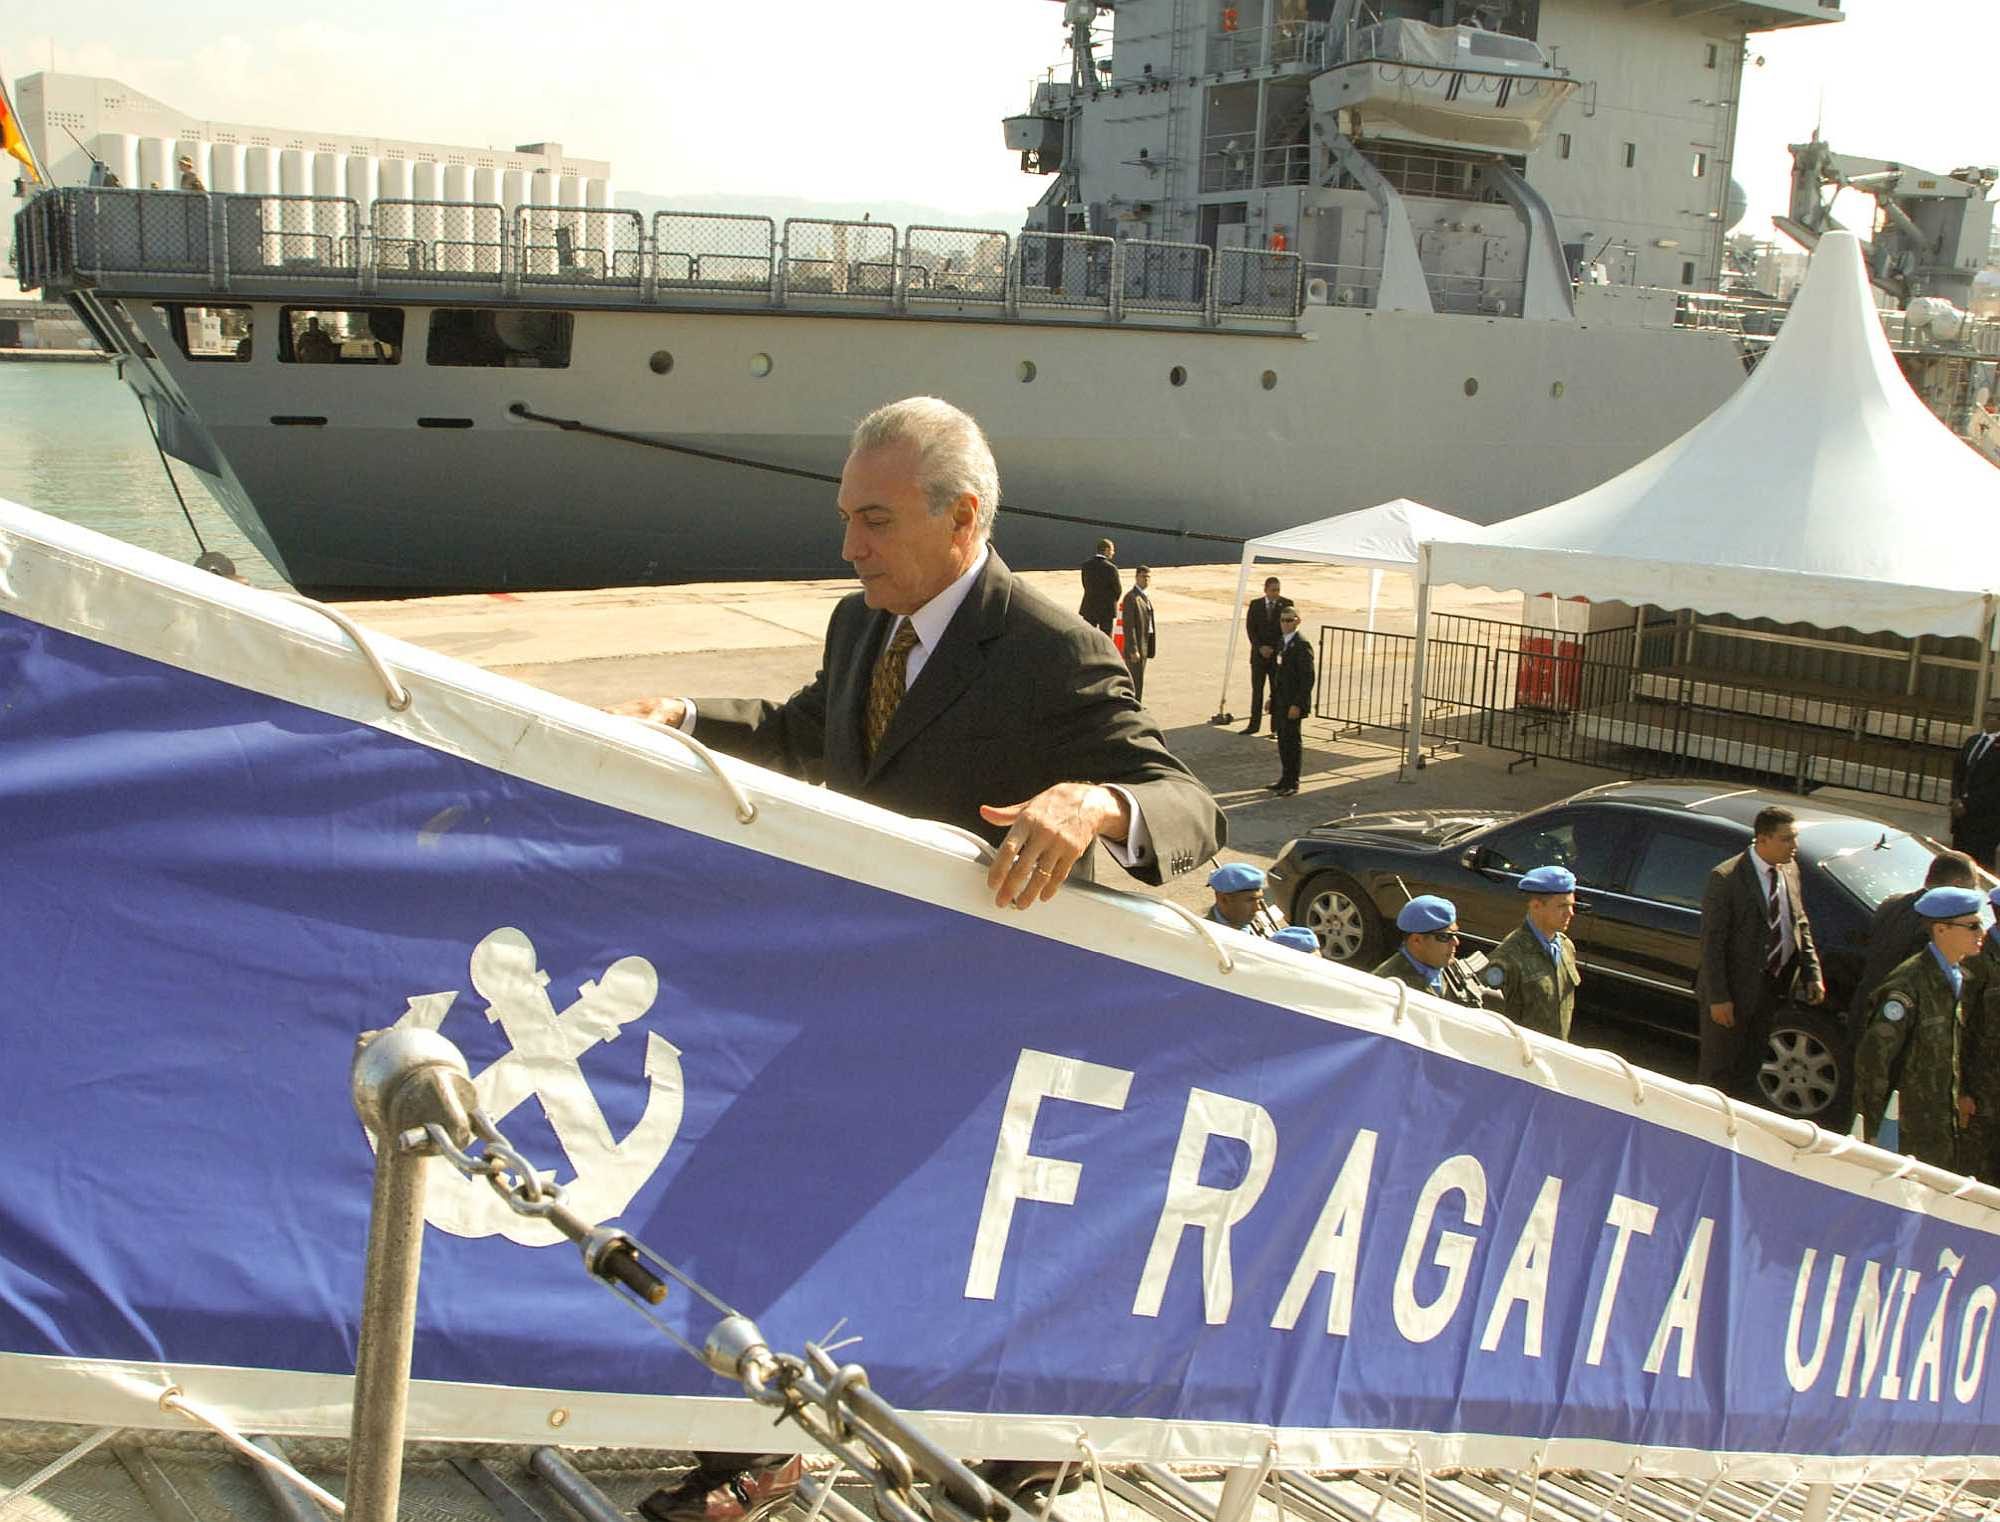 Michel Temer, then vice-president, at the arrival of União frigate in Lebanon